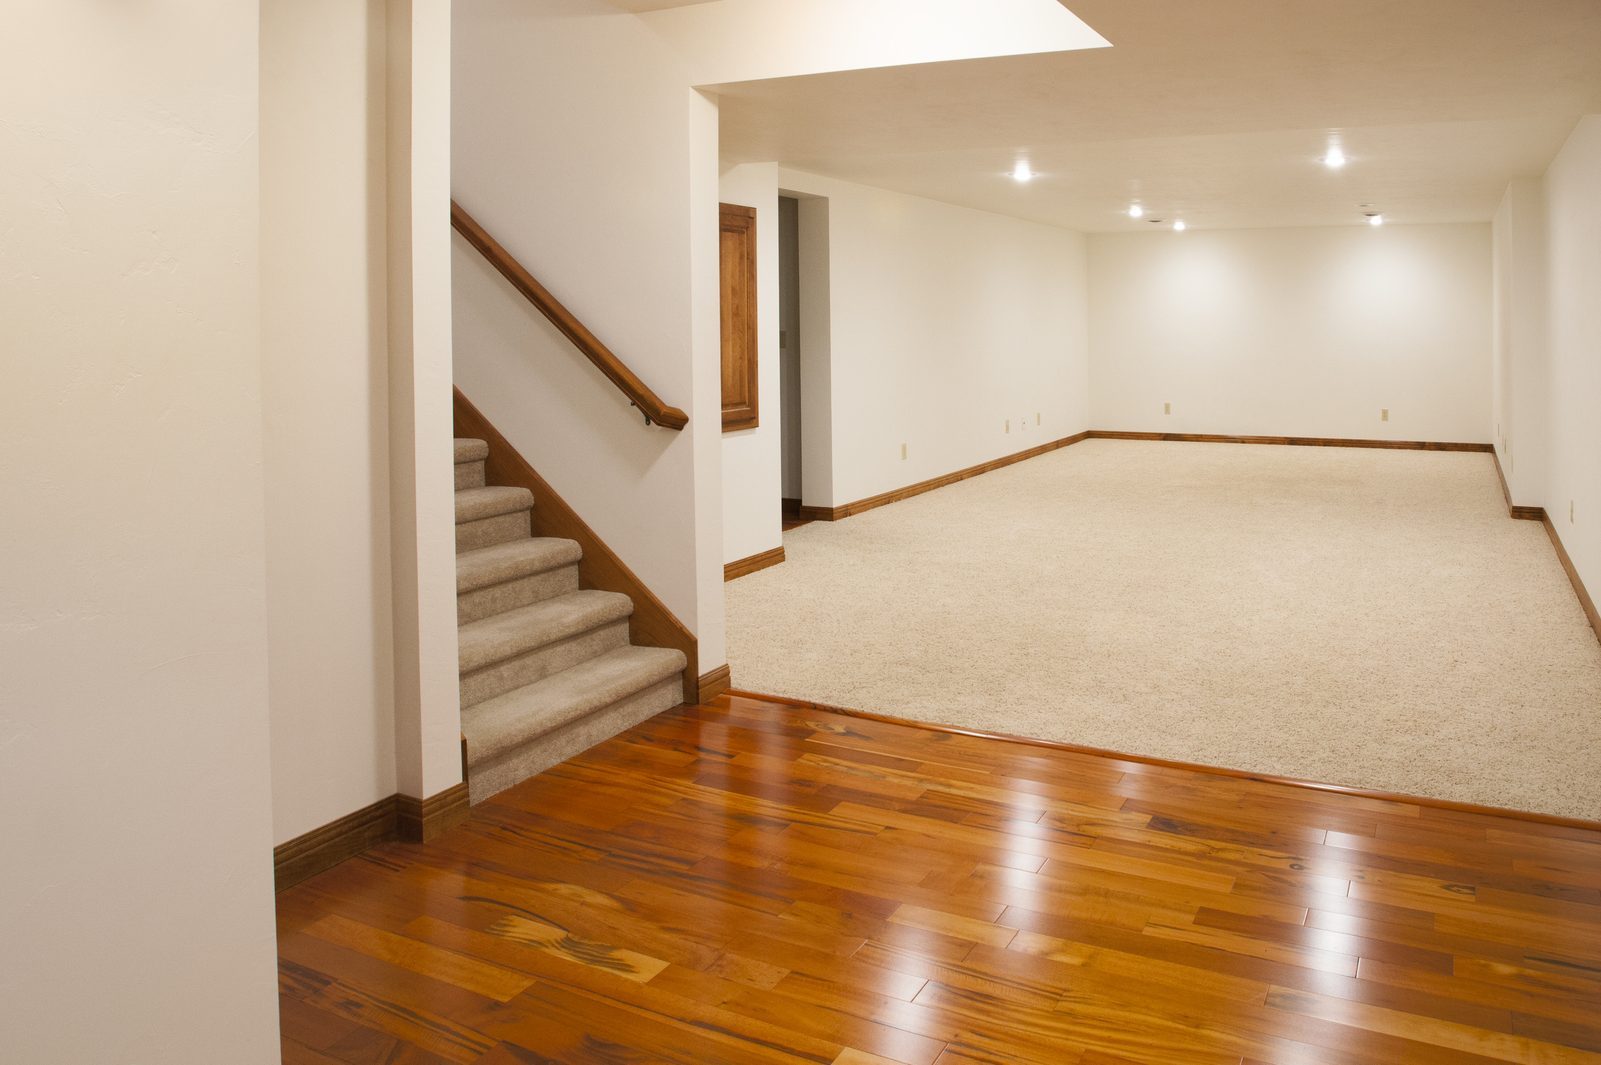 Using Laminate Flooring for the Basement: What To Know